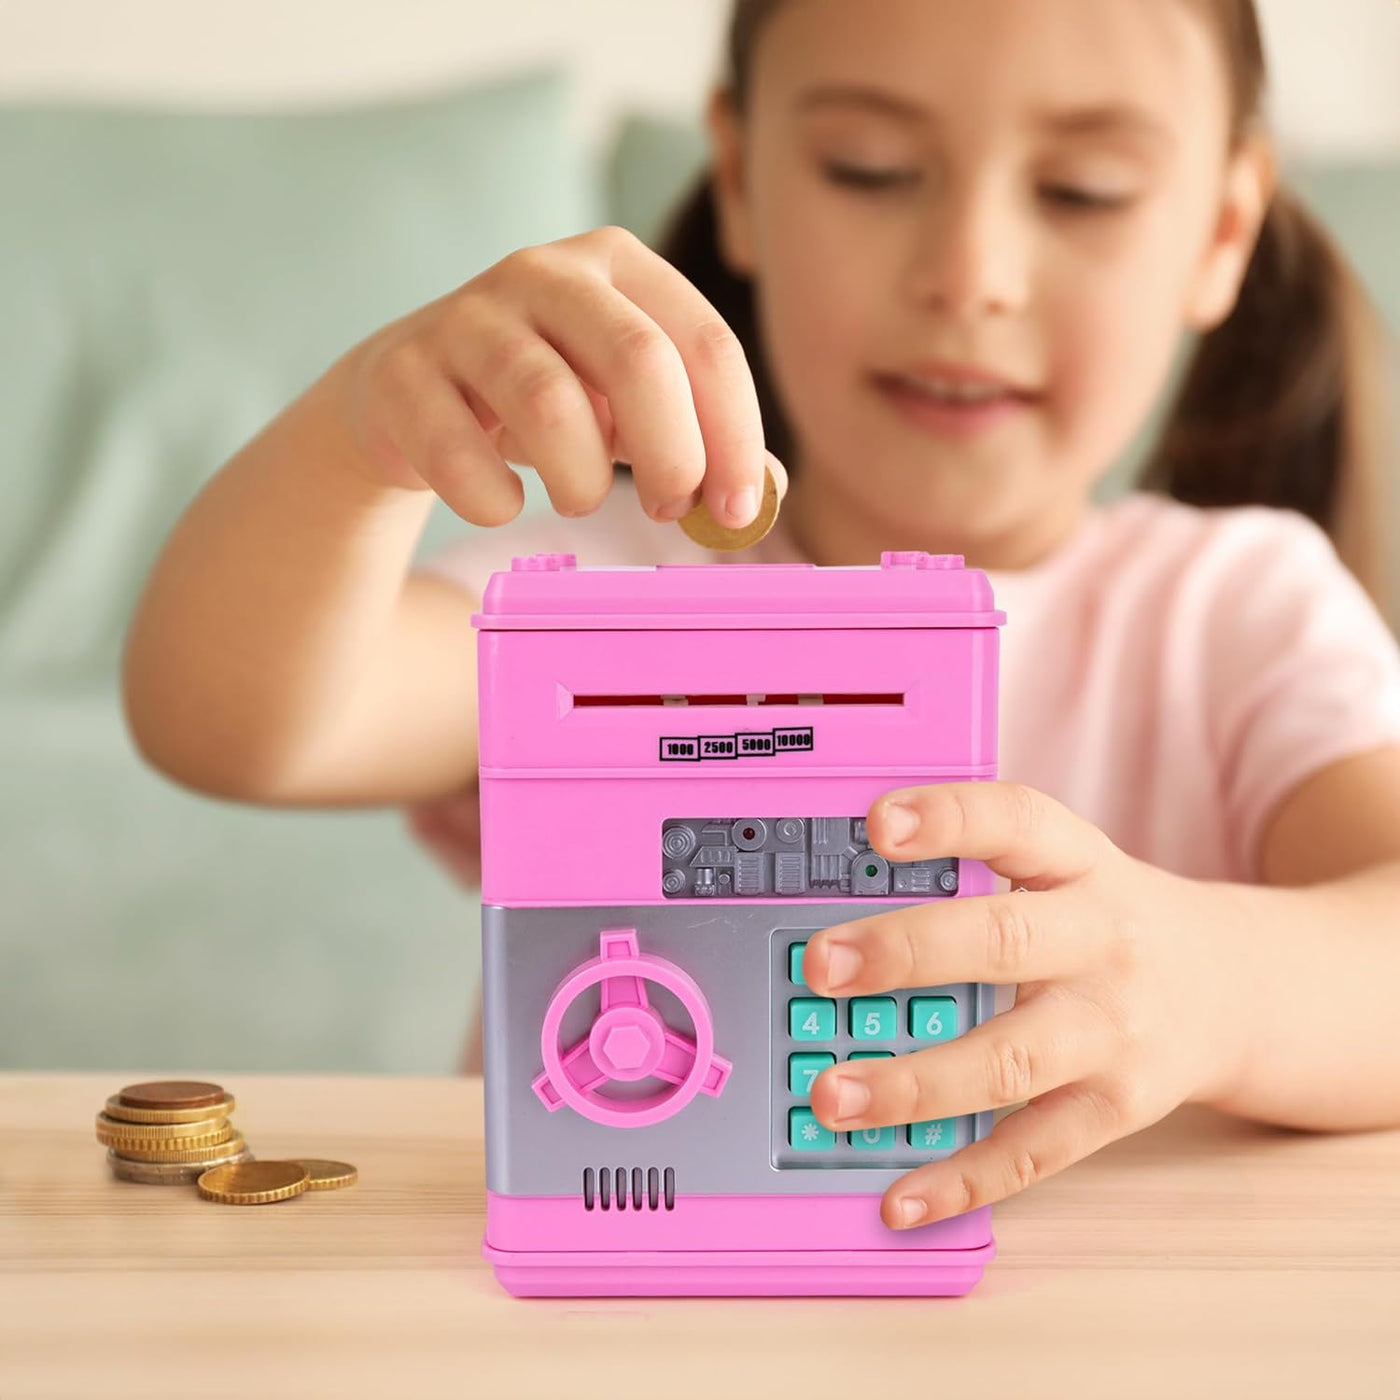 ArtCreativity ATM Piggy Bank for Kids - Pink Piggy Bank for Girls - ATM-Style Bill Retracting and Coin Slot on Top - Passcode -Protected Electric Piggy Bank - Cool Kids ATM Machine for Early Savings